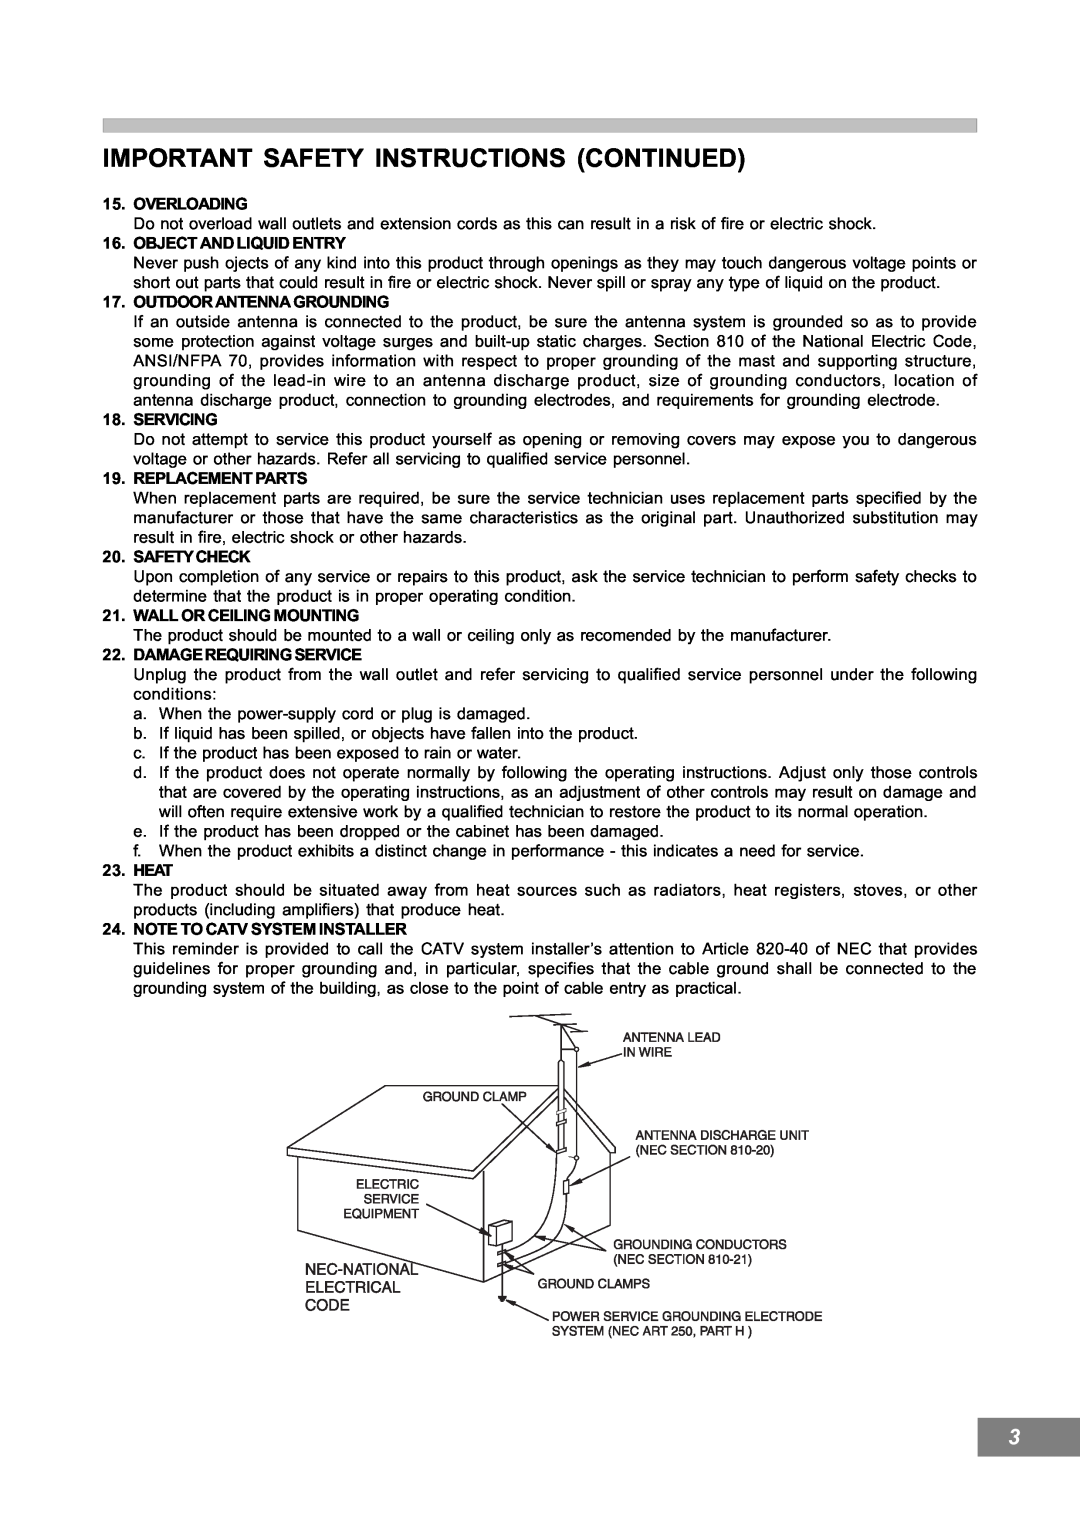 Emerson AV101 manual Important Safety Instructions Continued, Overloading 